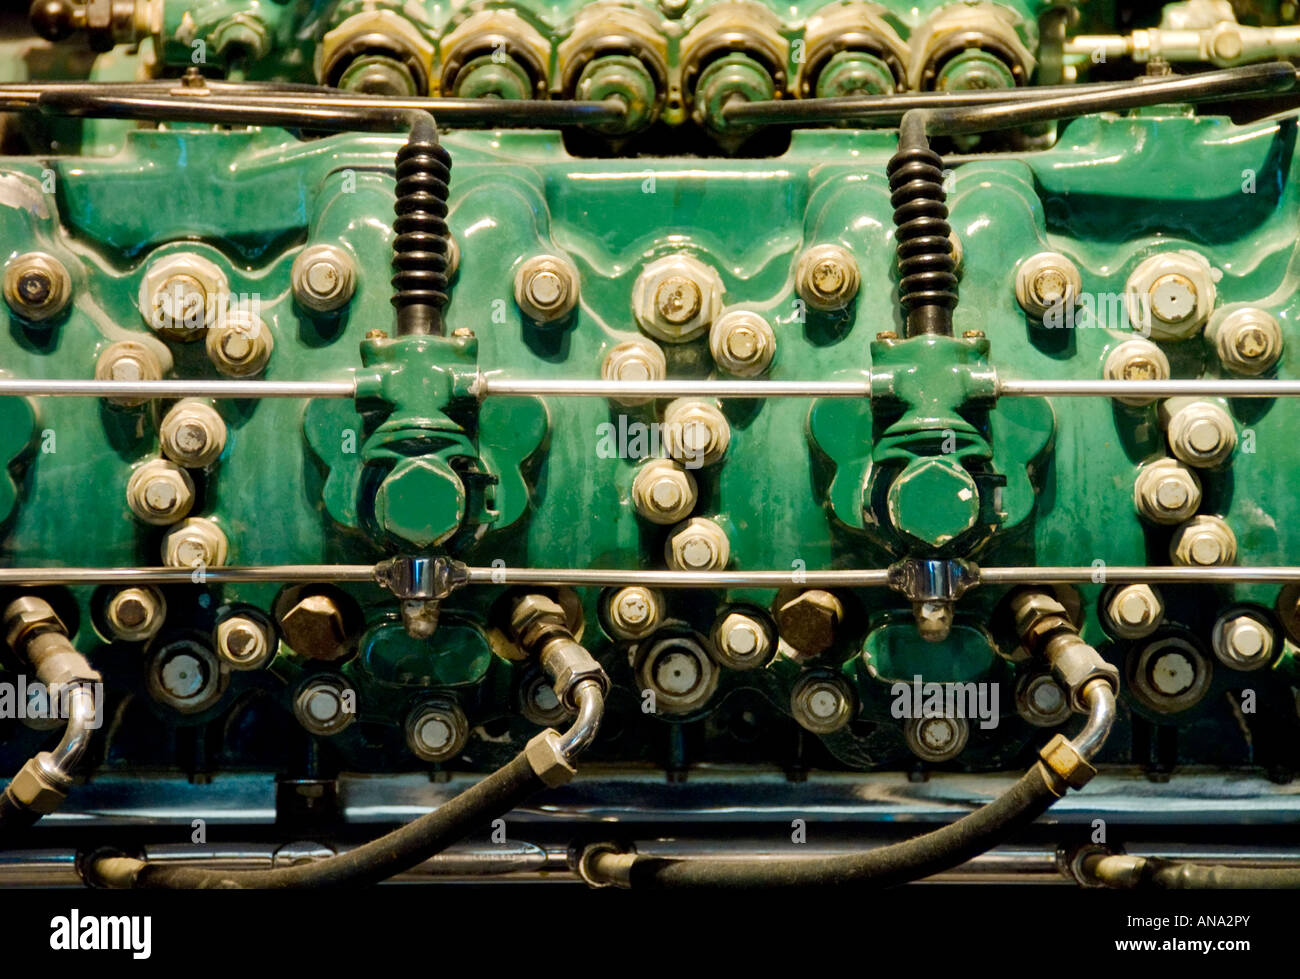 Detail of vintage aircraft engines Stock Photo